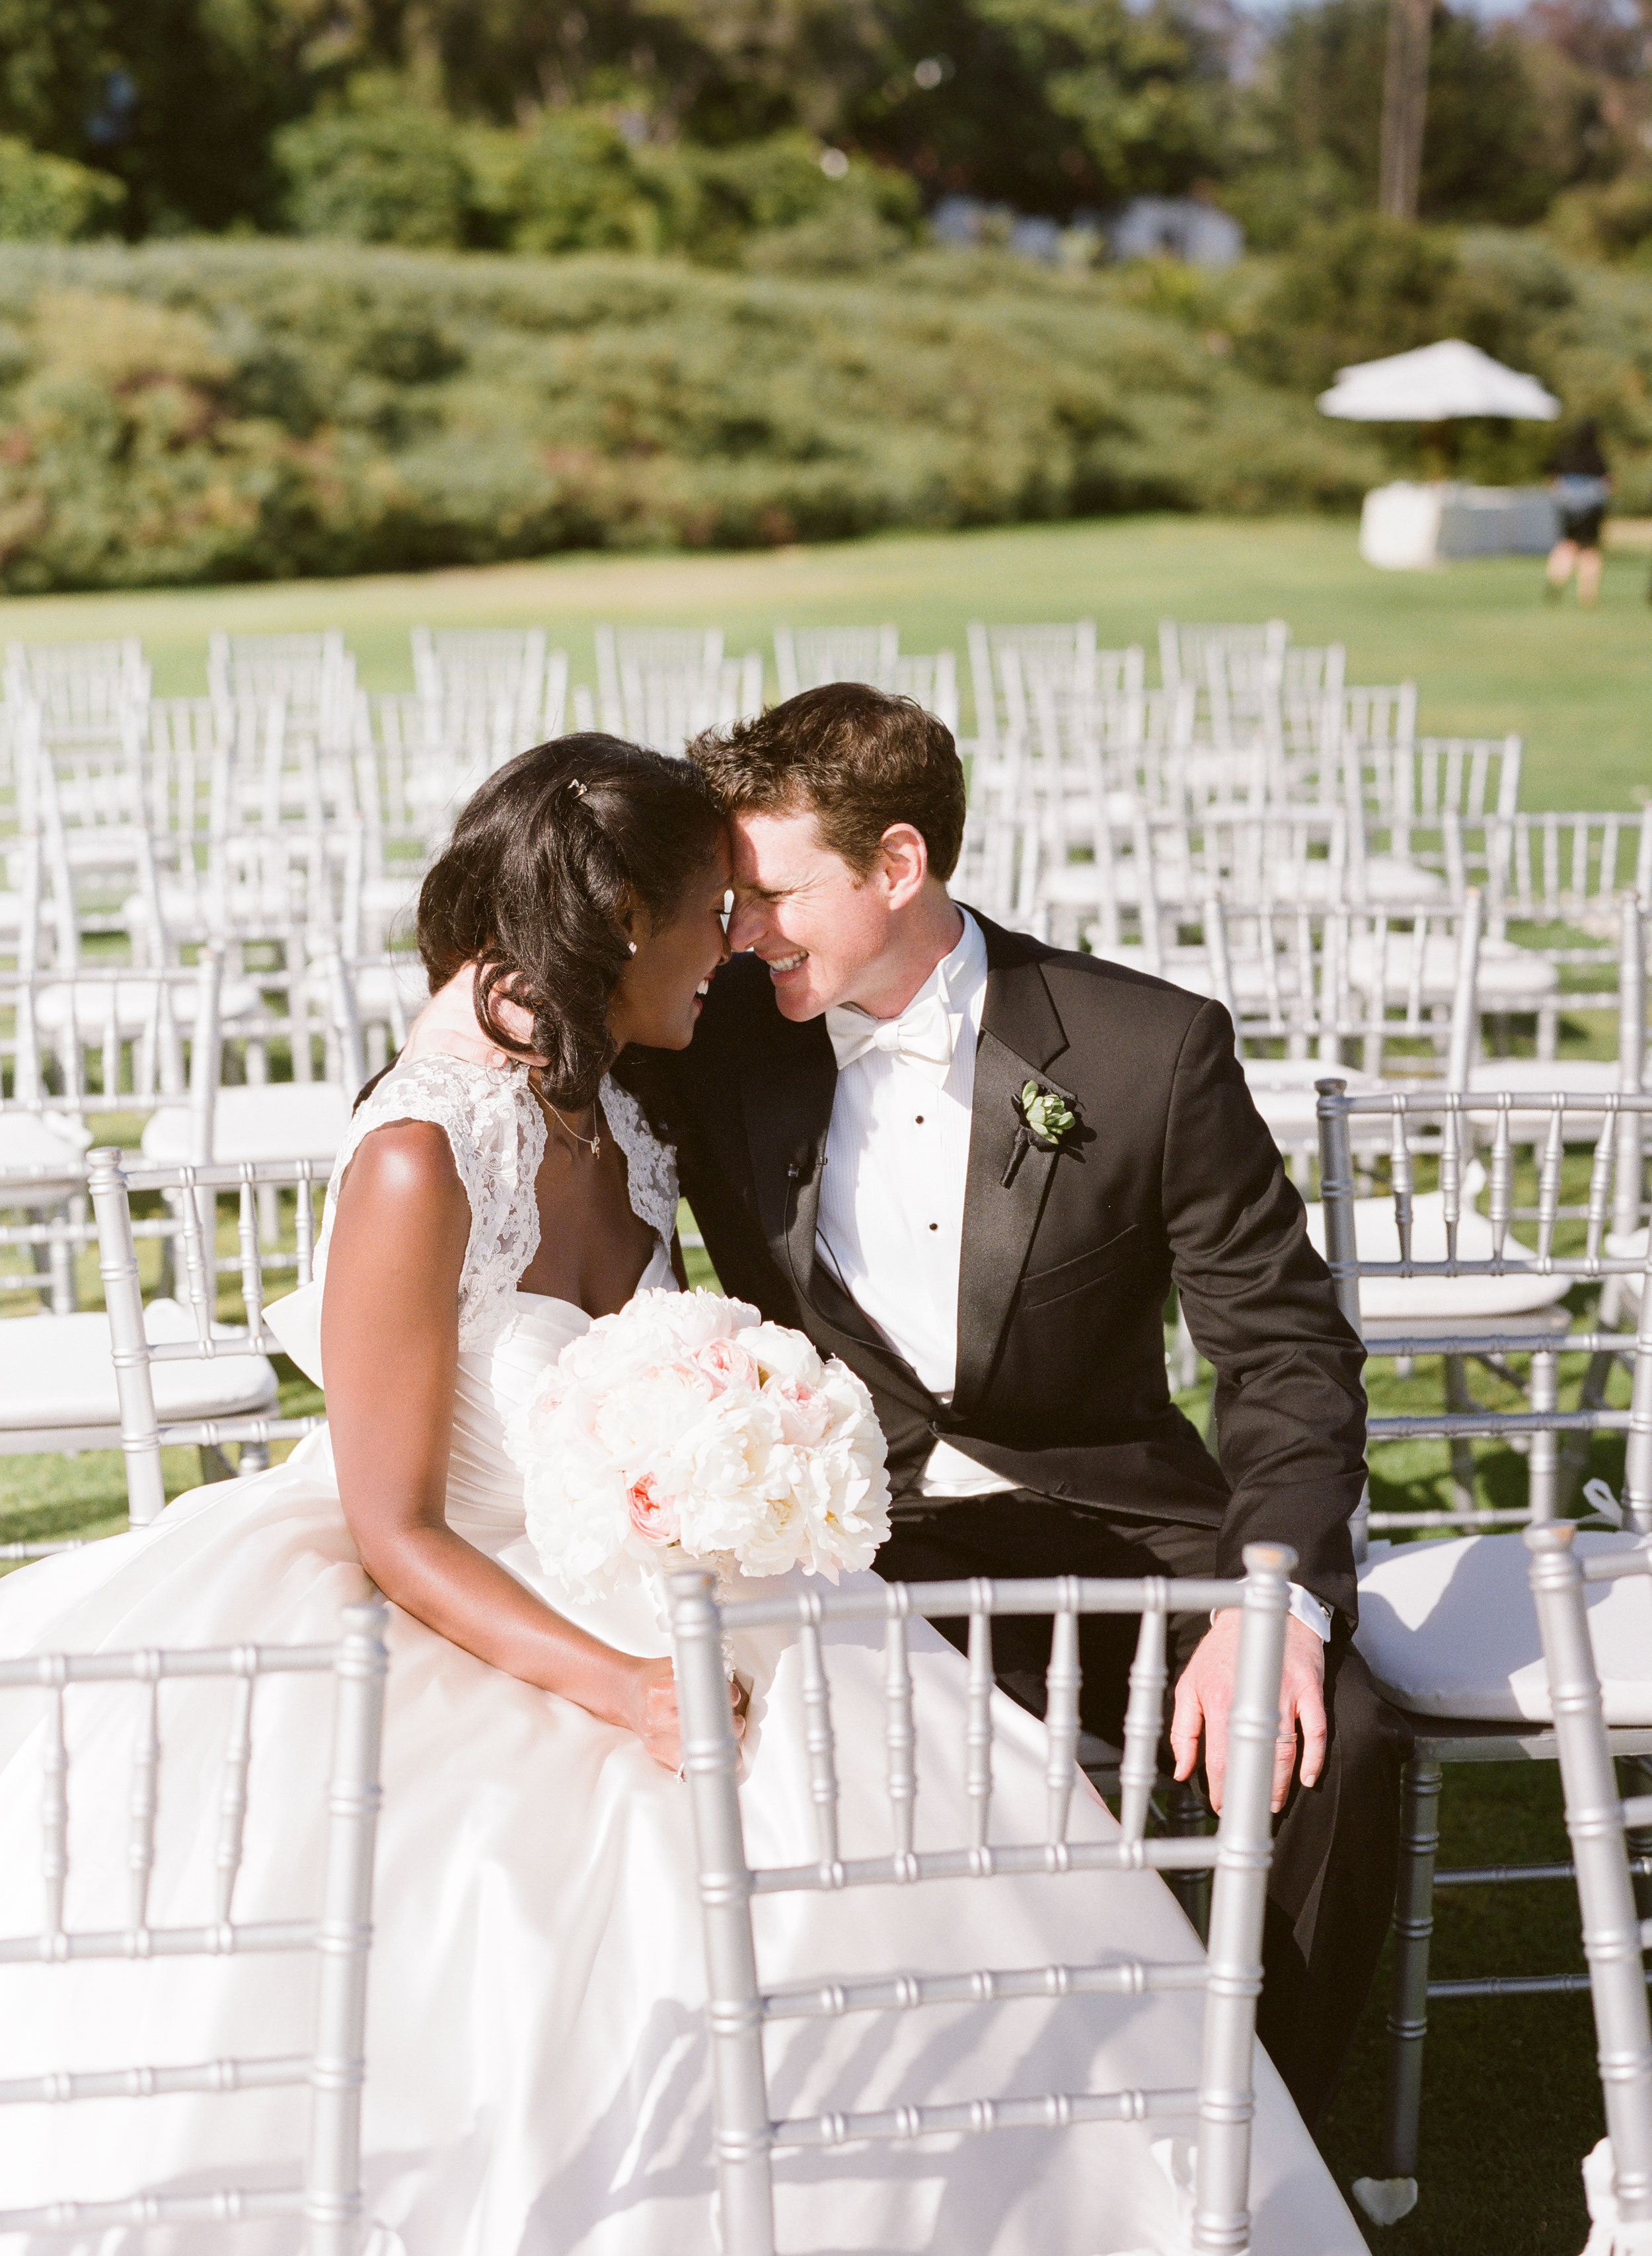 Wedding Ceremony at Montecito Country Club | Miriam Lindbeck | Photography by Anna Costa